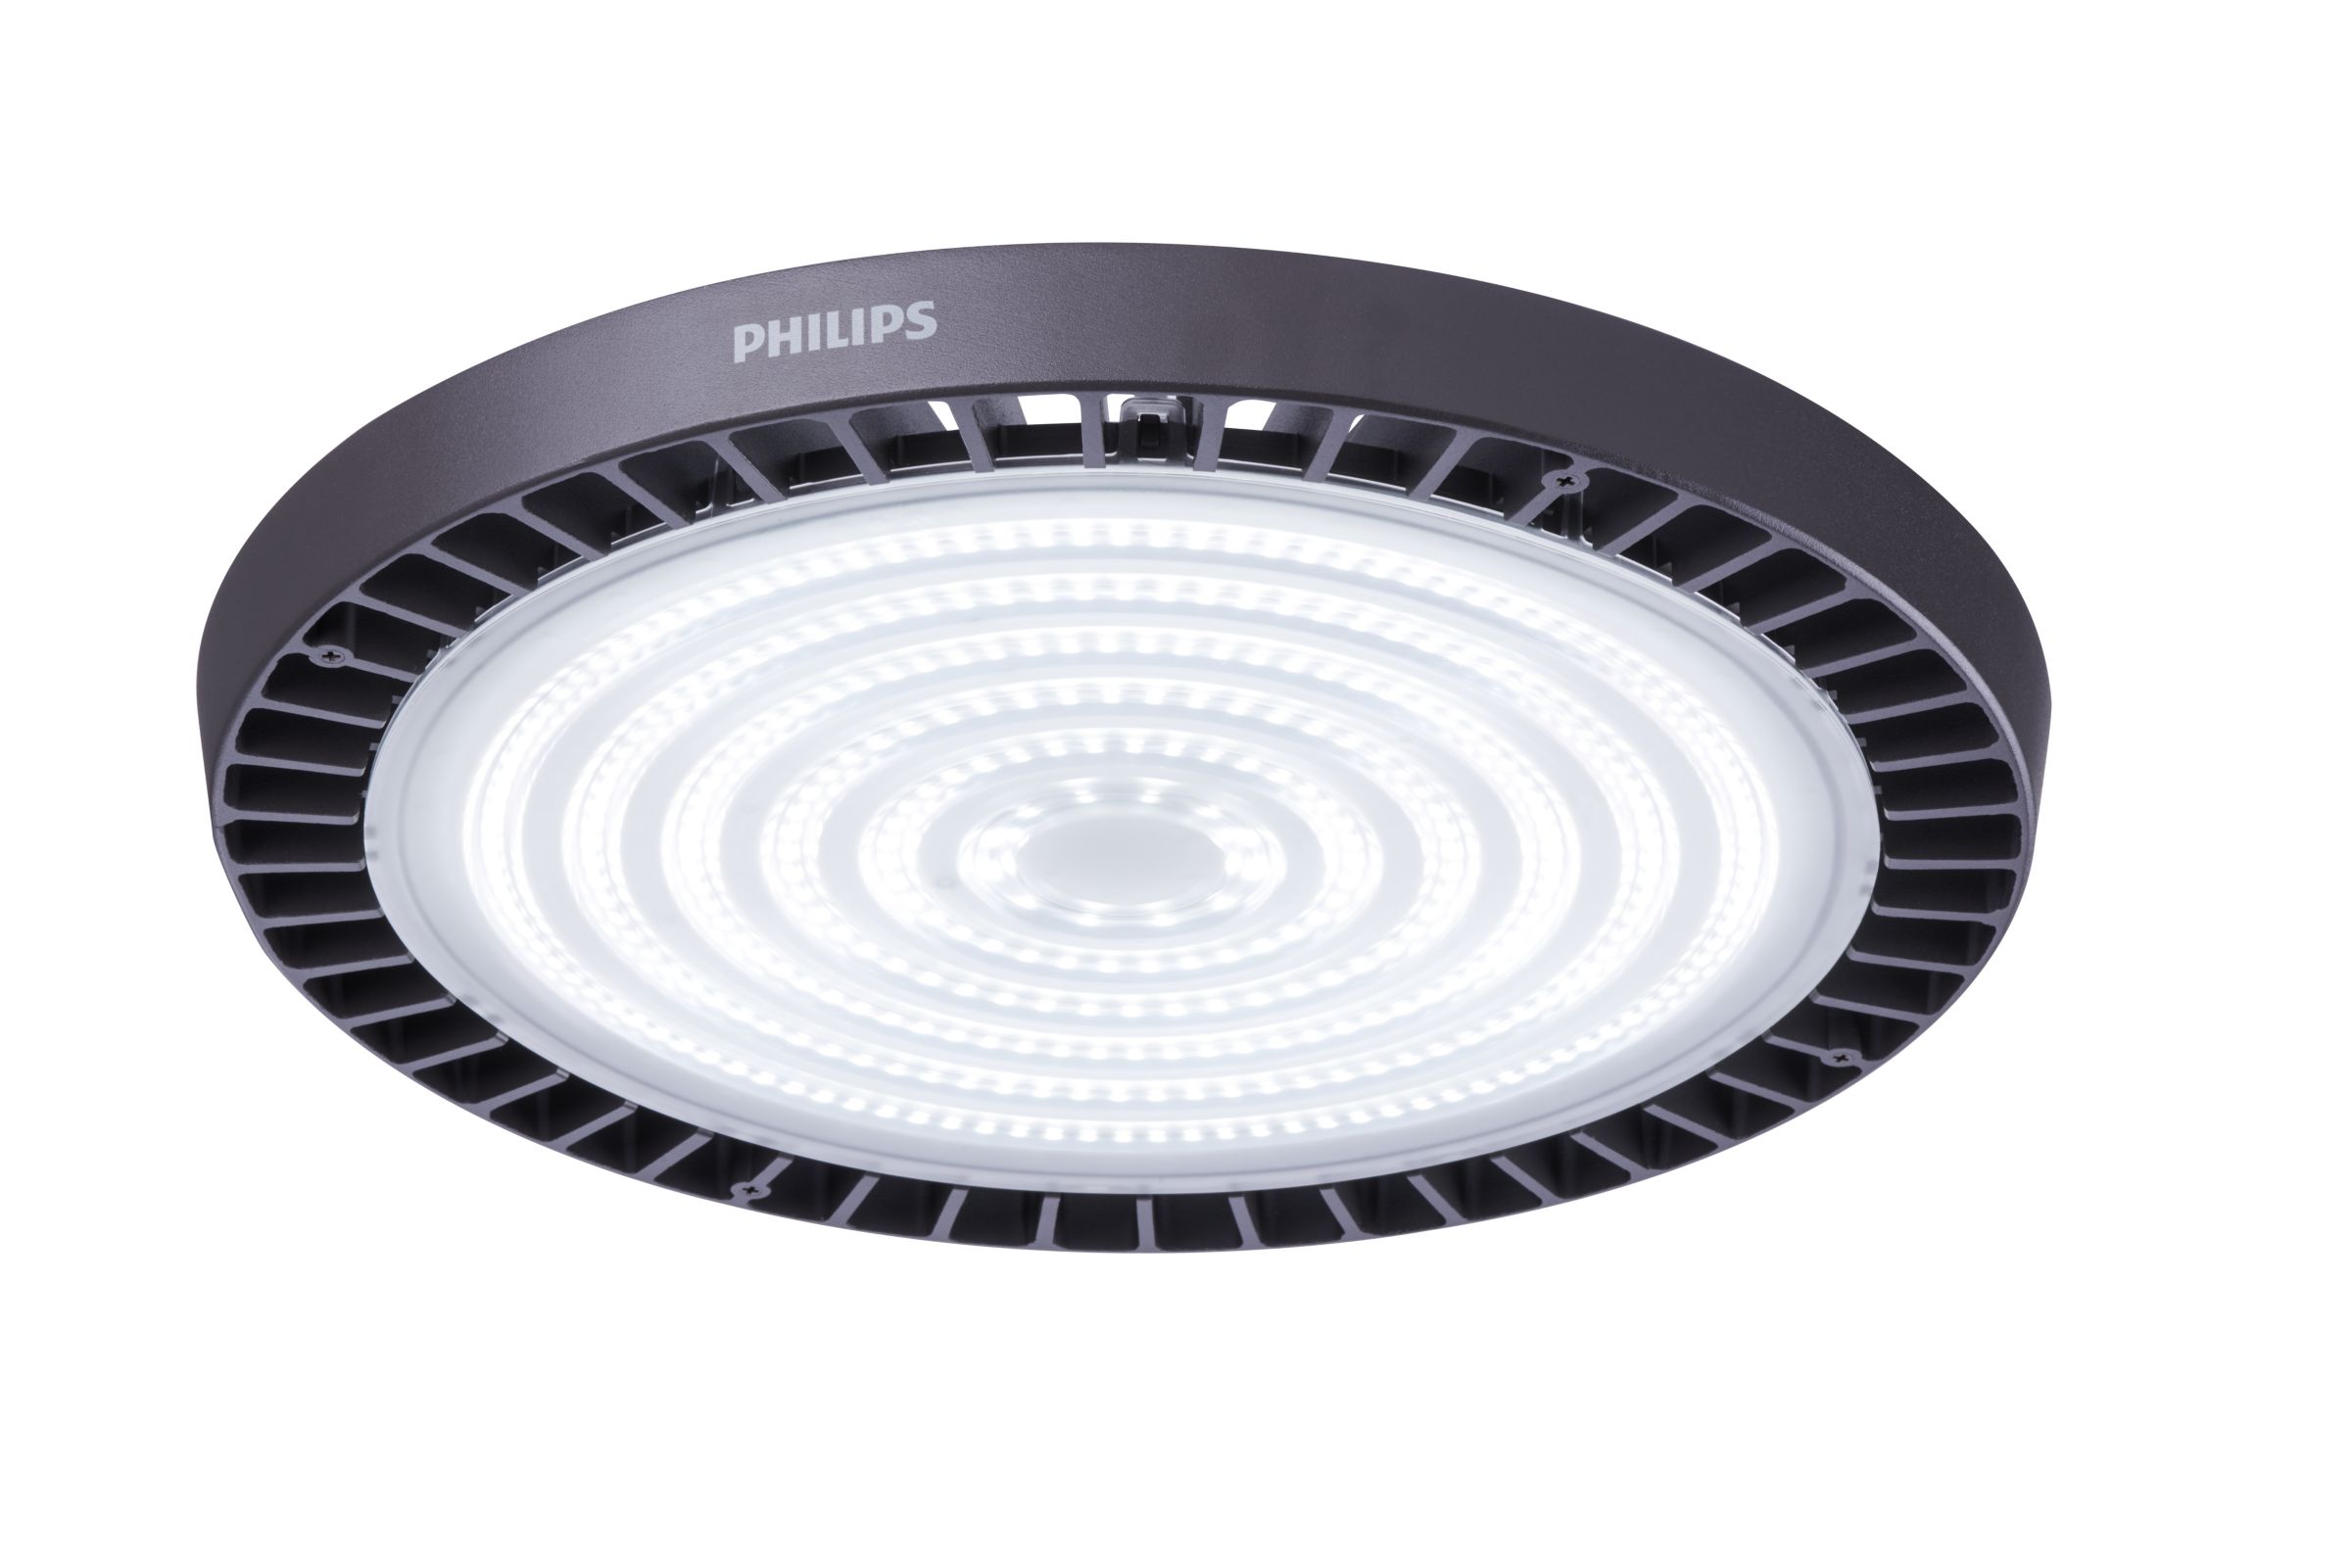 20+ Philips high bay led lighting catalogue ideas in 2021 